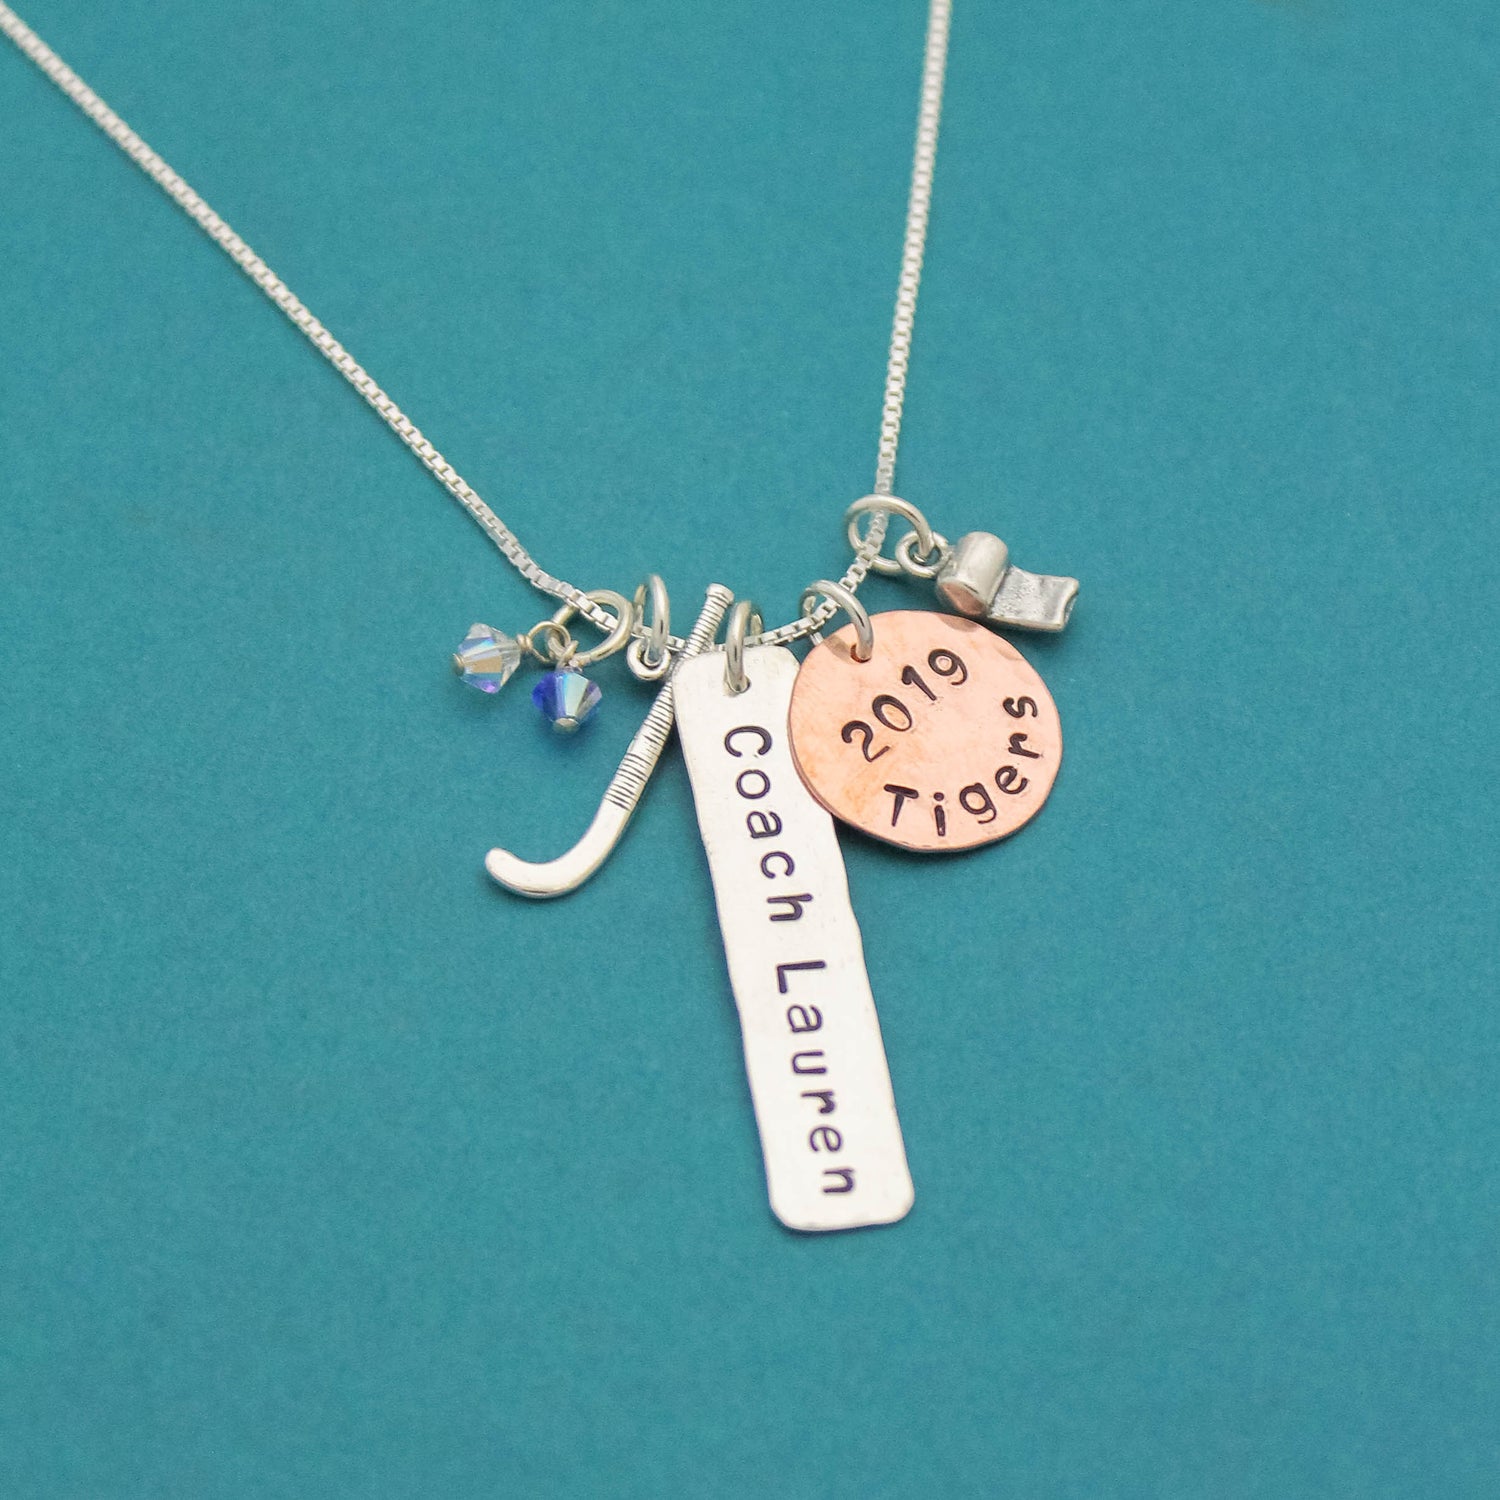 Coach Necklace Choice of Sport Sterling Silver and Copper Customized Hand Stamped Jewelry